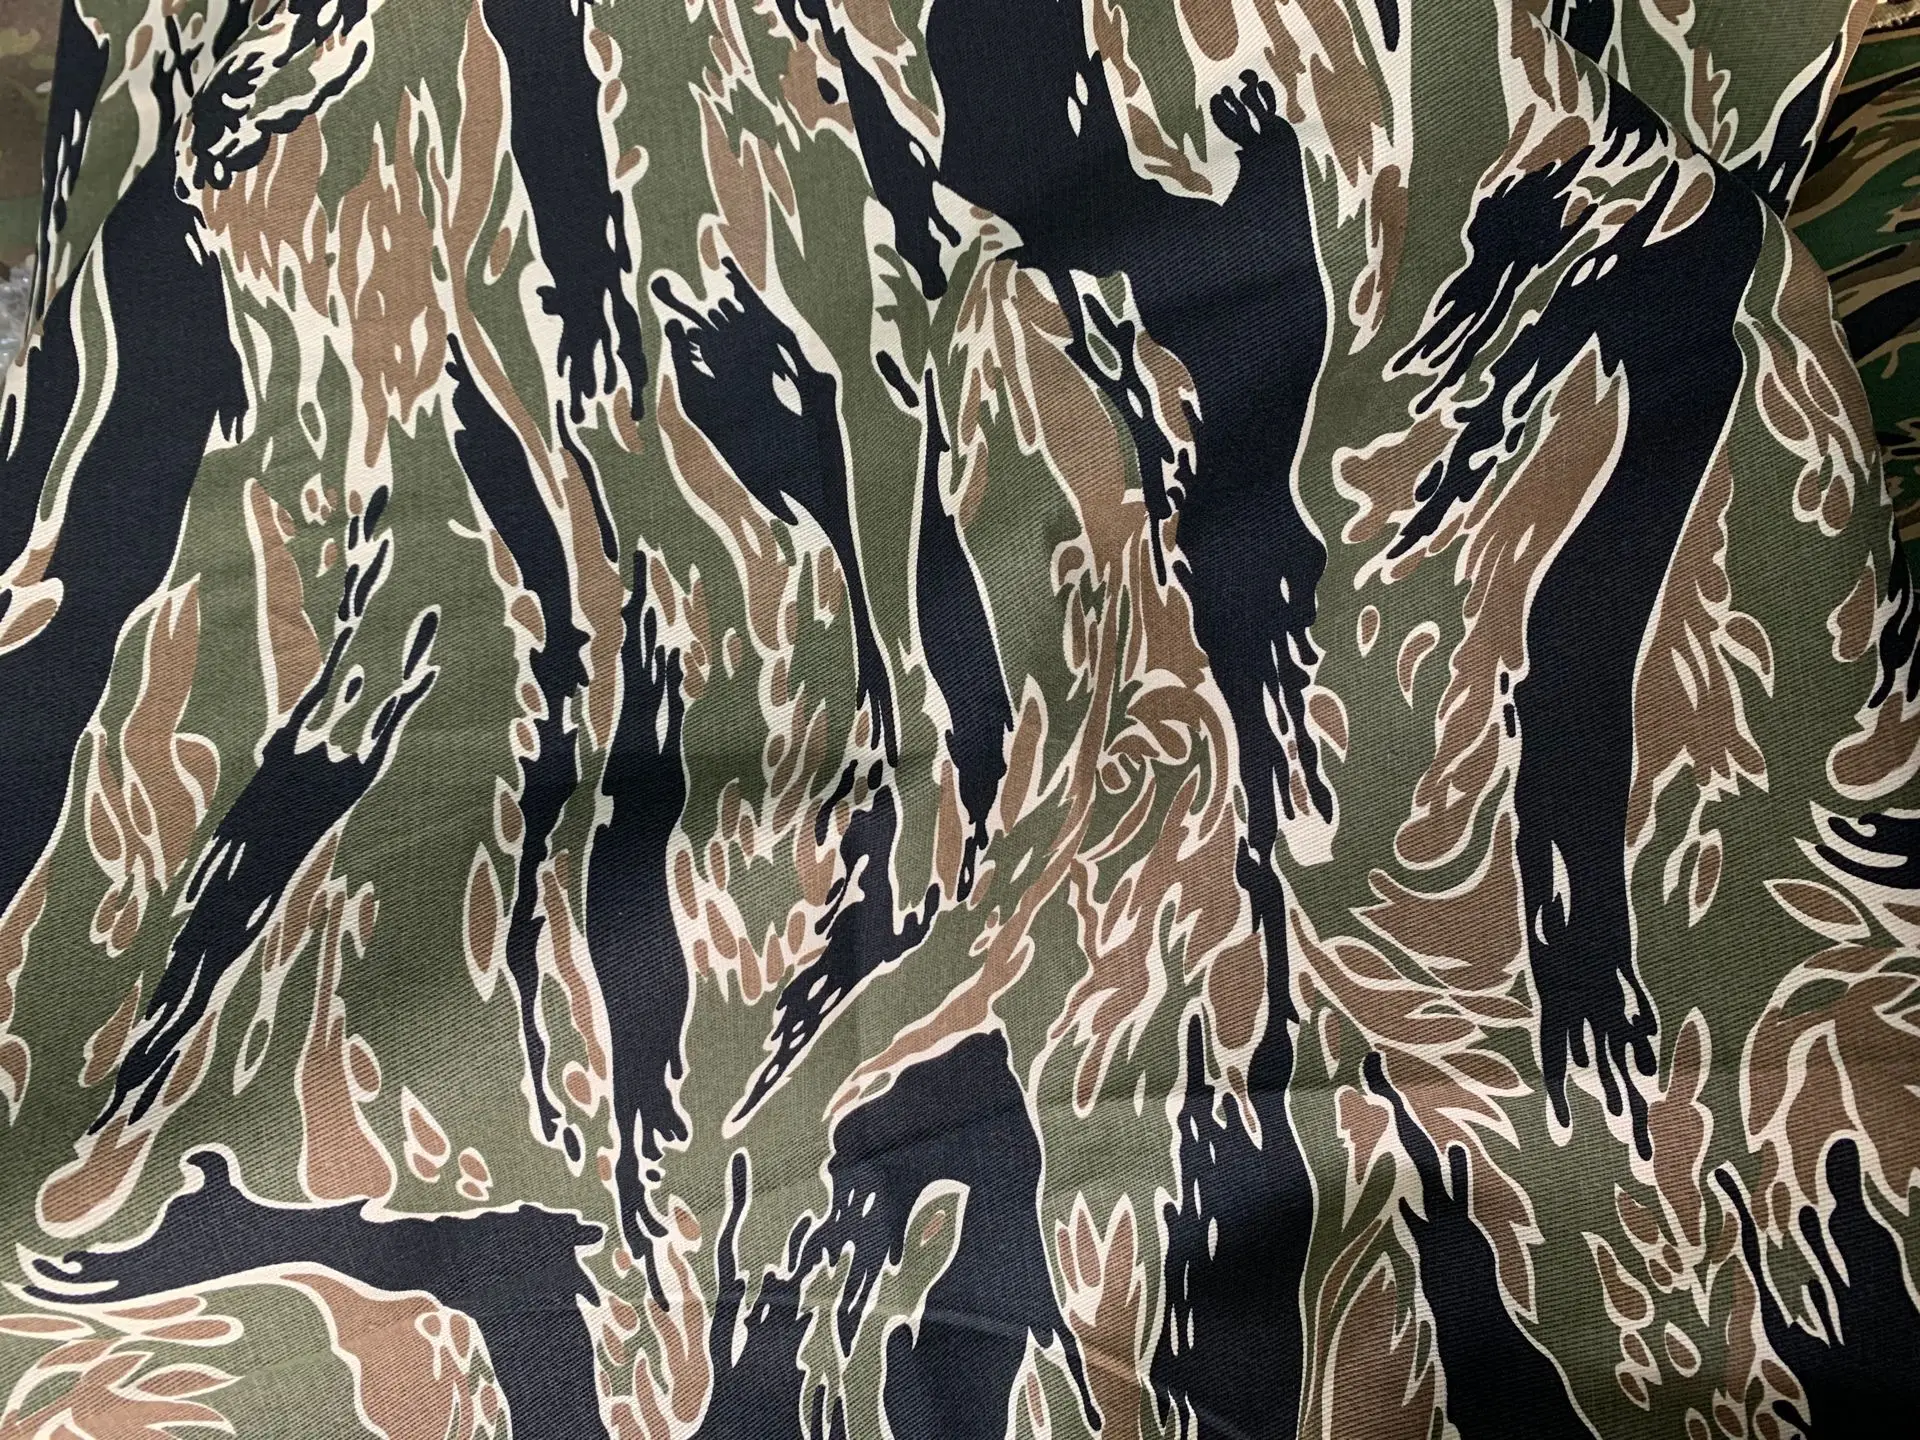 Teal Camoflage Camo Stripes Army Military Soldier Jungle Print Roostery Pillow Sham 100% Cotton Sateen 26in x 20in Knife-Edge Sham 